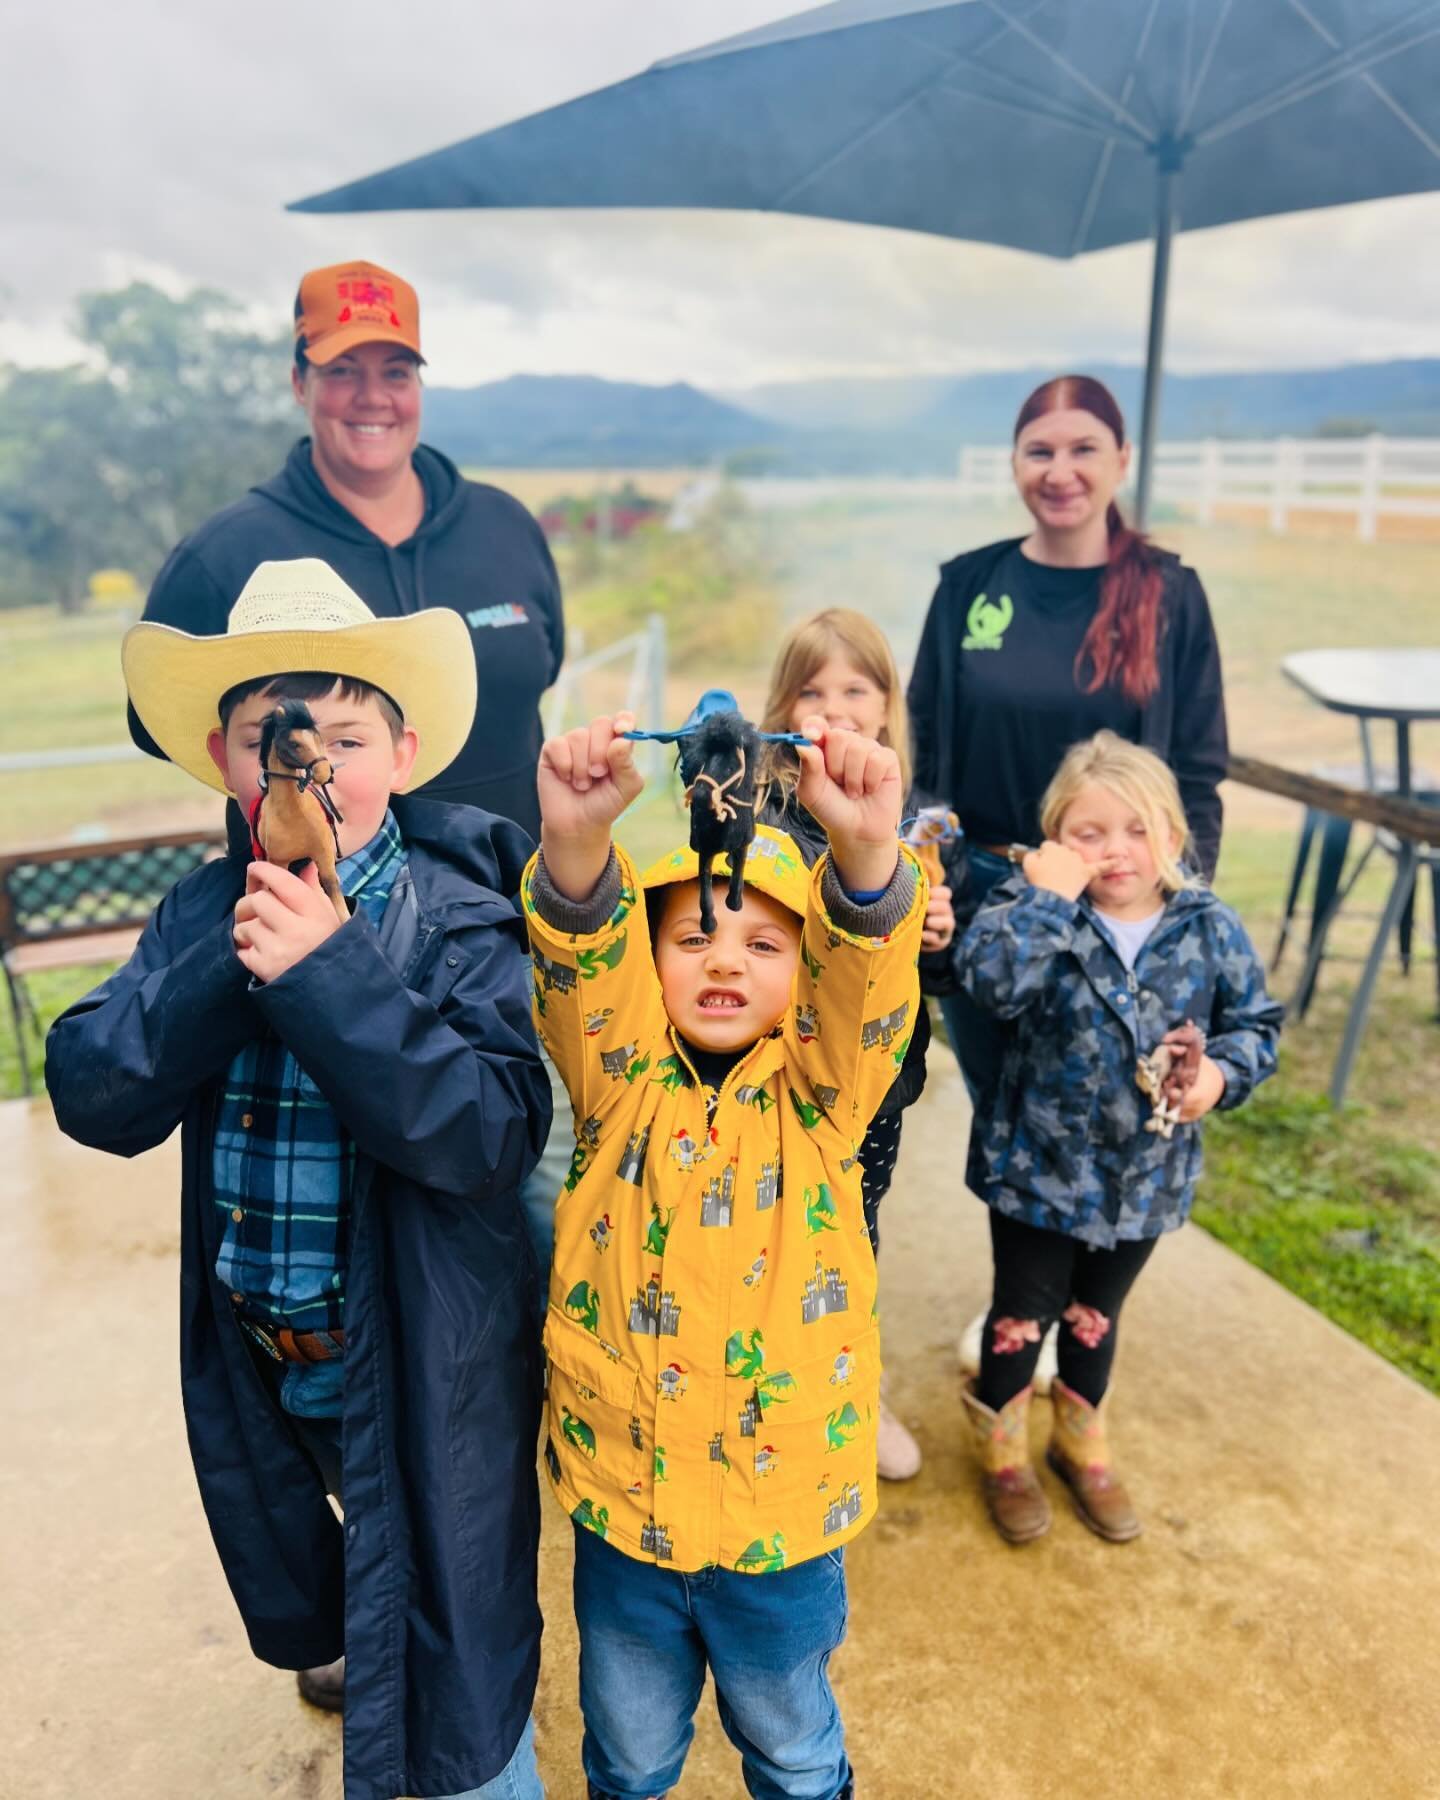 We had a fantastic start to Term 2 with our group programs at Amaroo! 

Our &lsquo;Amaroo Explorers&rsquo; under 12&rsquo;s group had a blast exploring the Amaroo, meeting the herd, and hanging out with the chickens. It was a morning filled with fun,